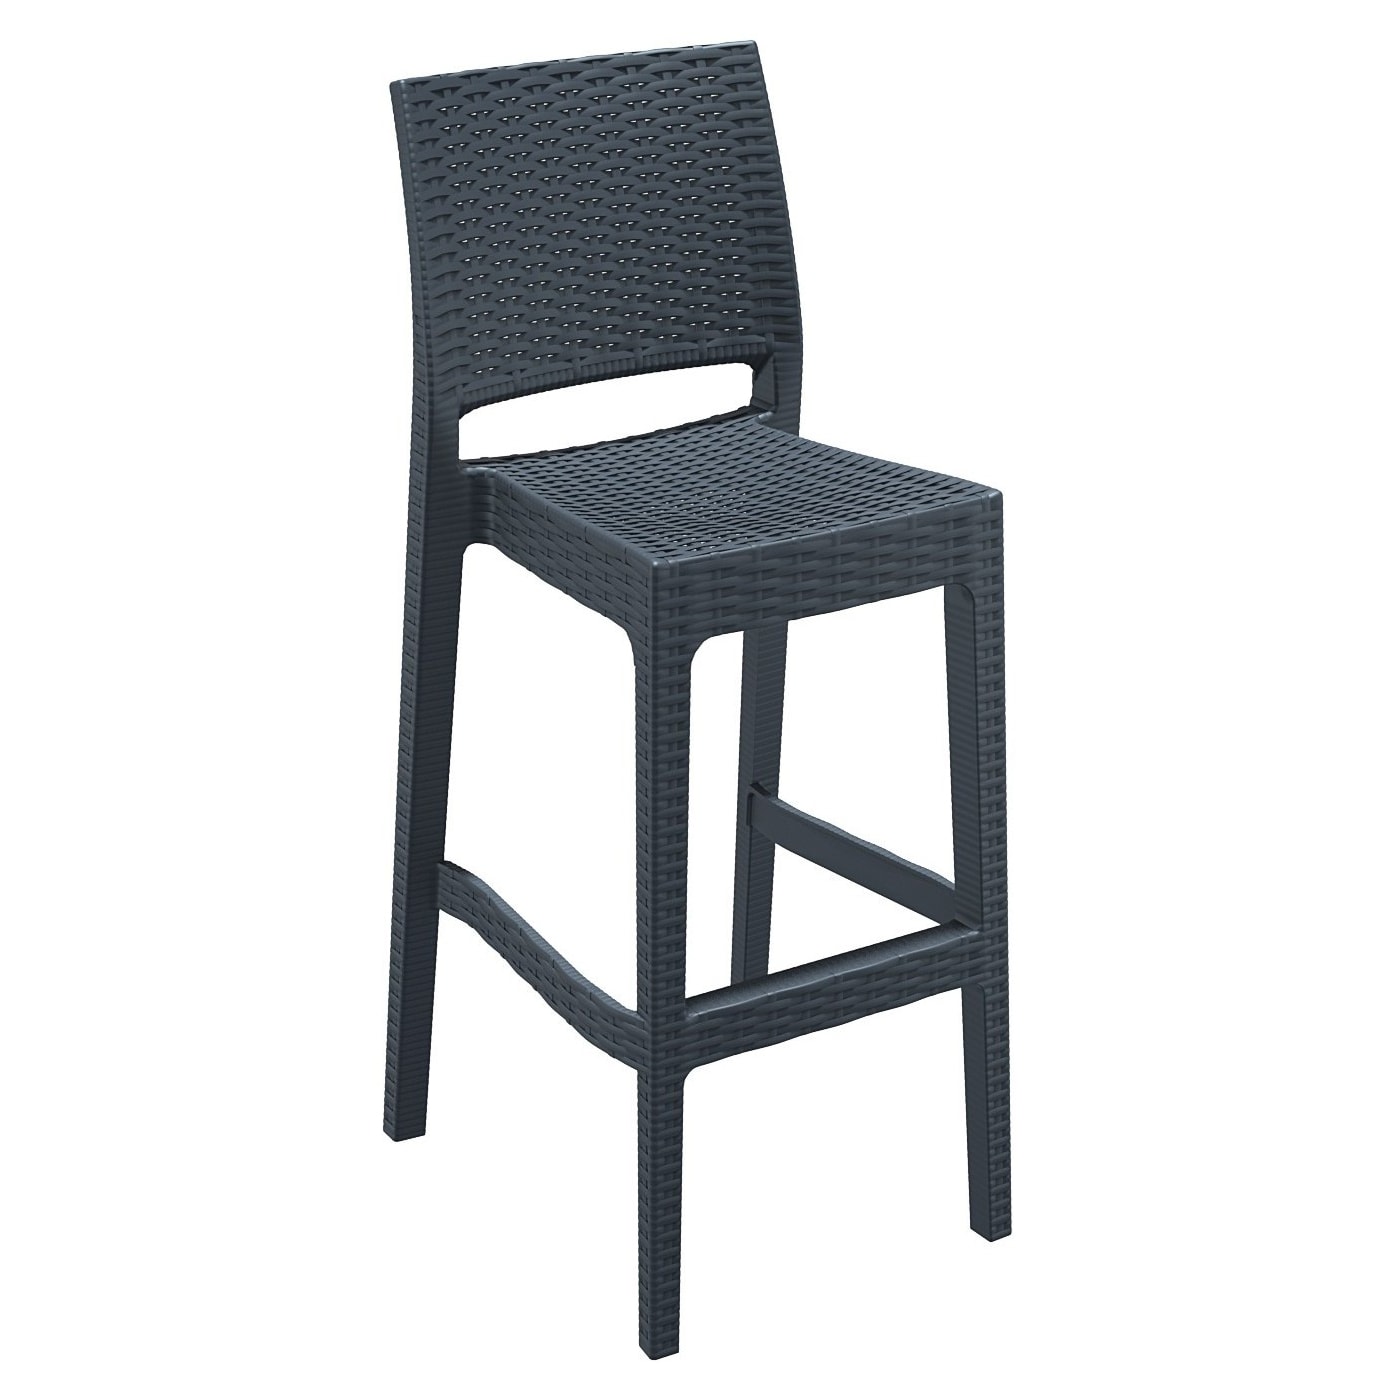 Beverly Wickerlook Resin Bar Stool with Beverly Wickerlook Resin Bar Stool